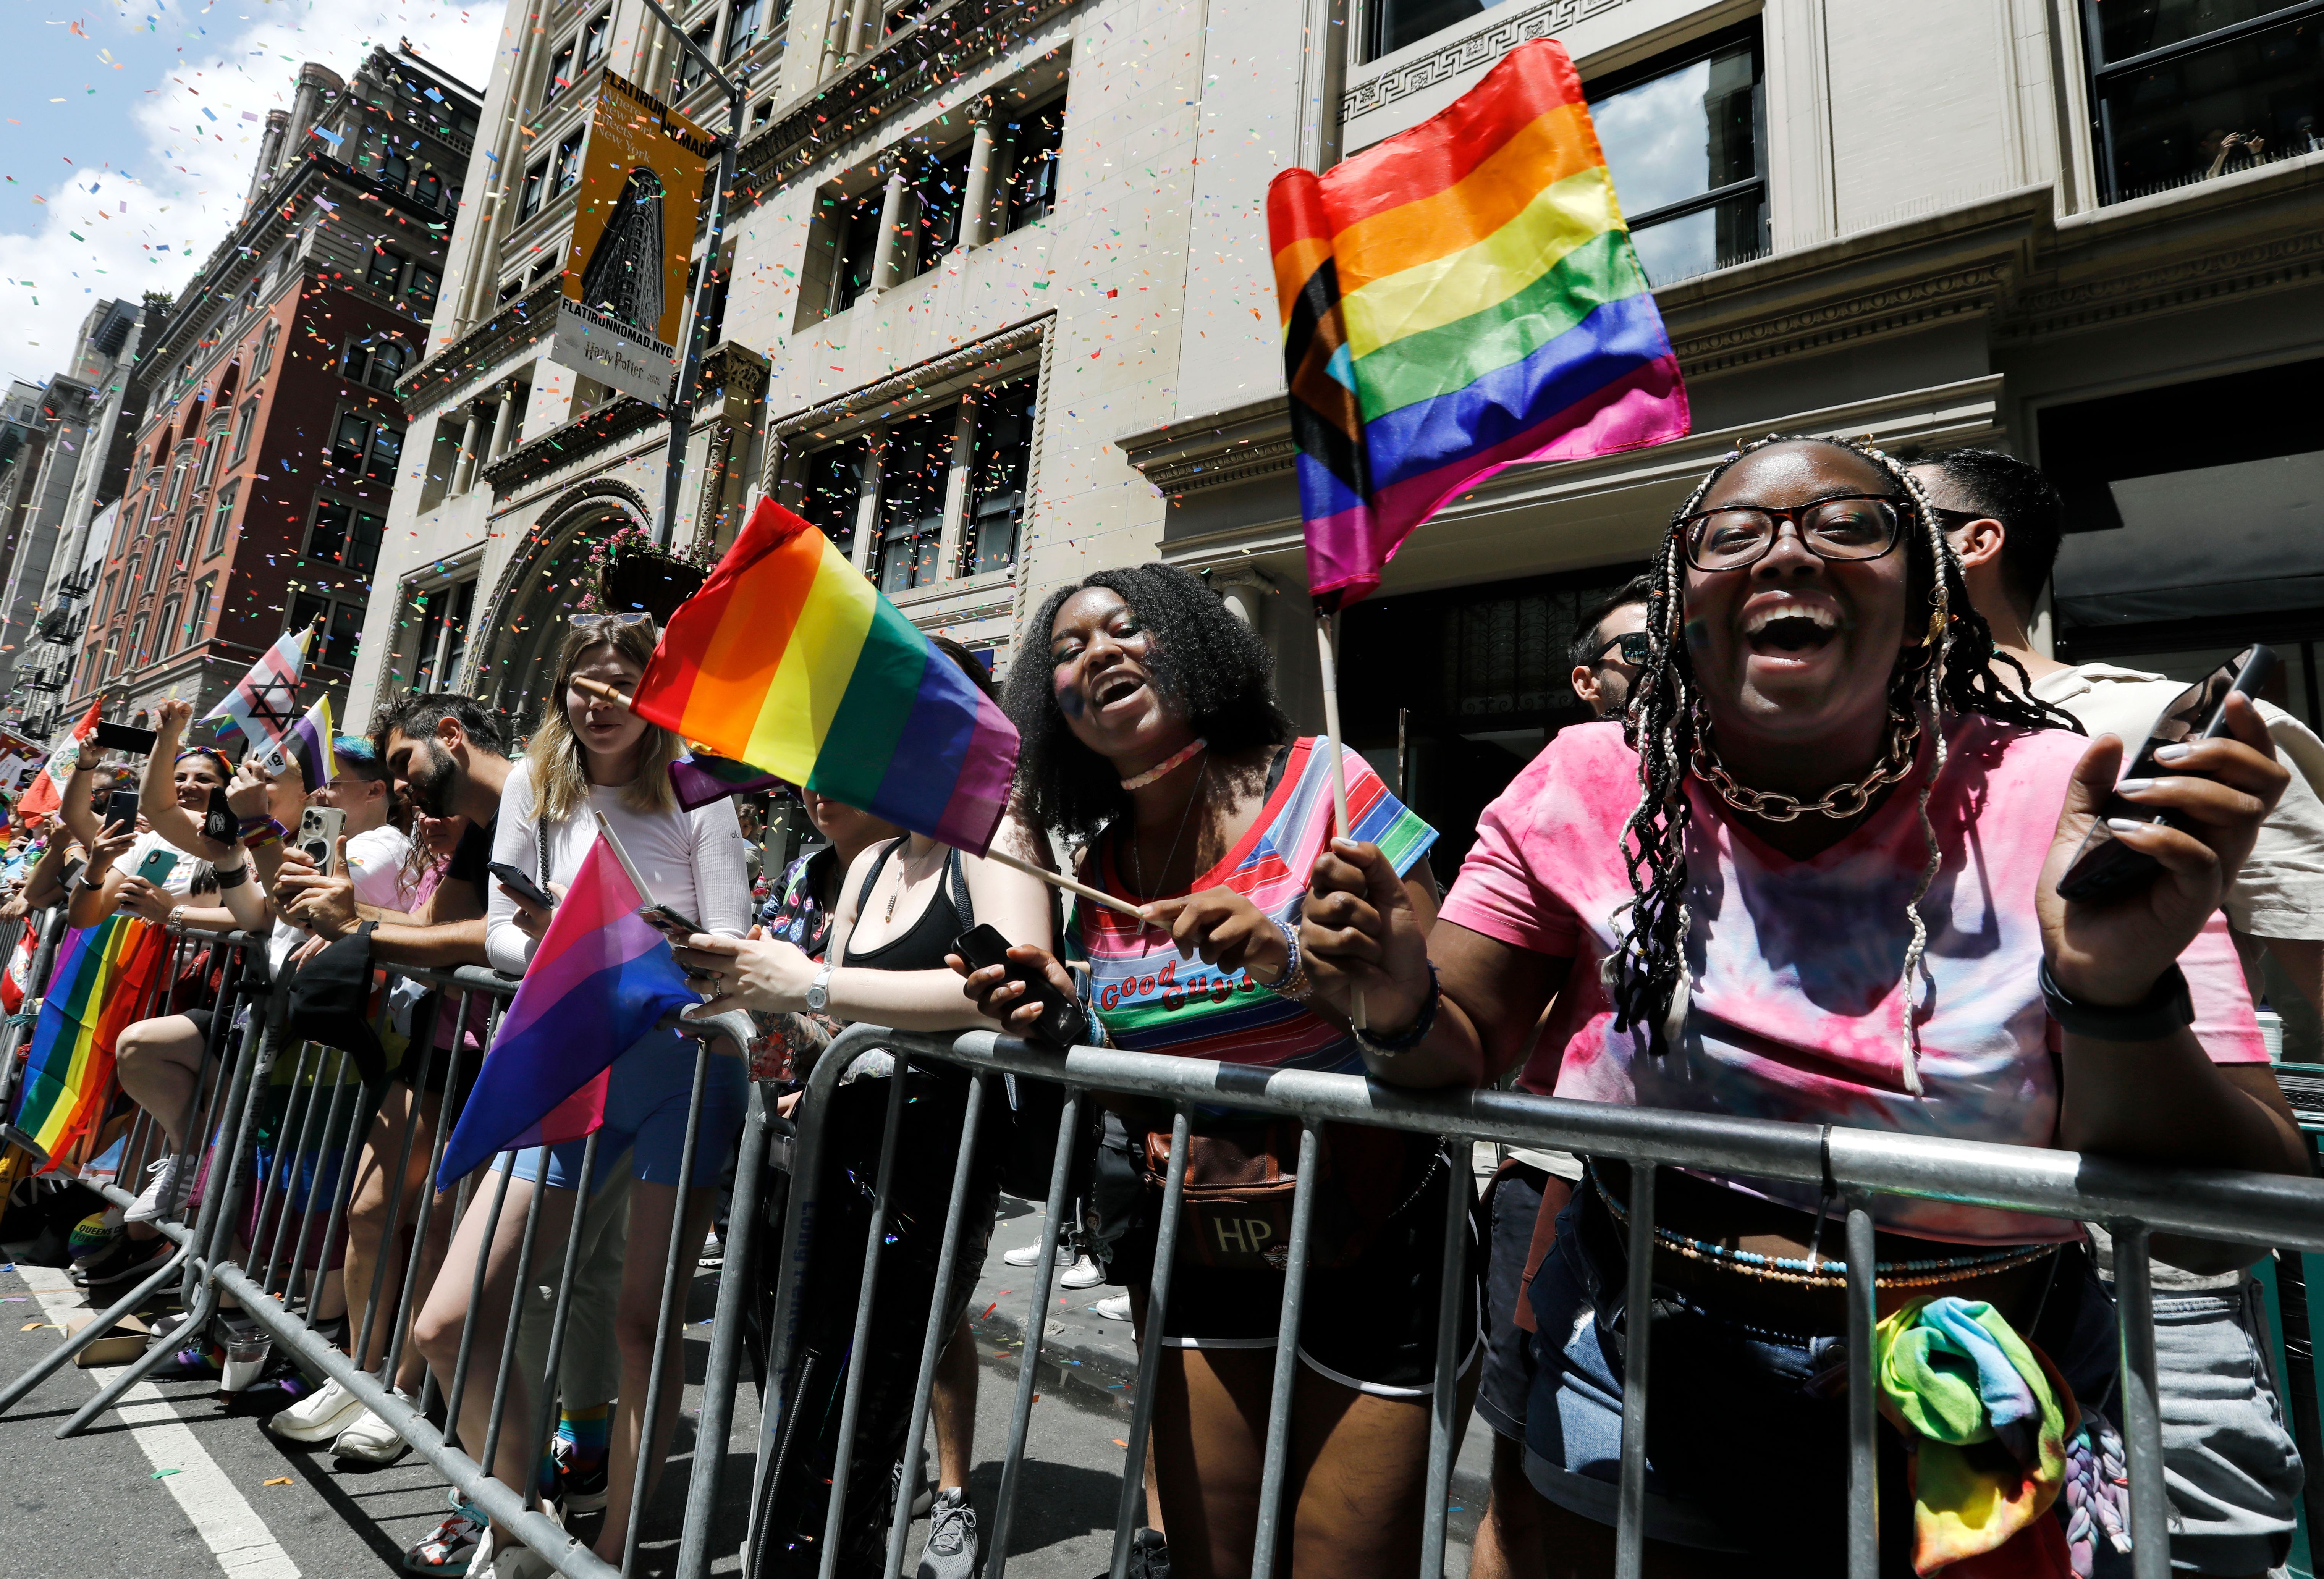 NYC Pride 2023: Events, Happenings, & More - Secret NYC